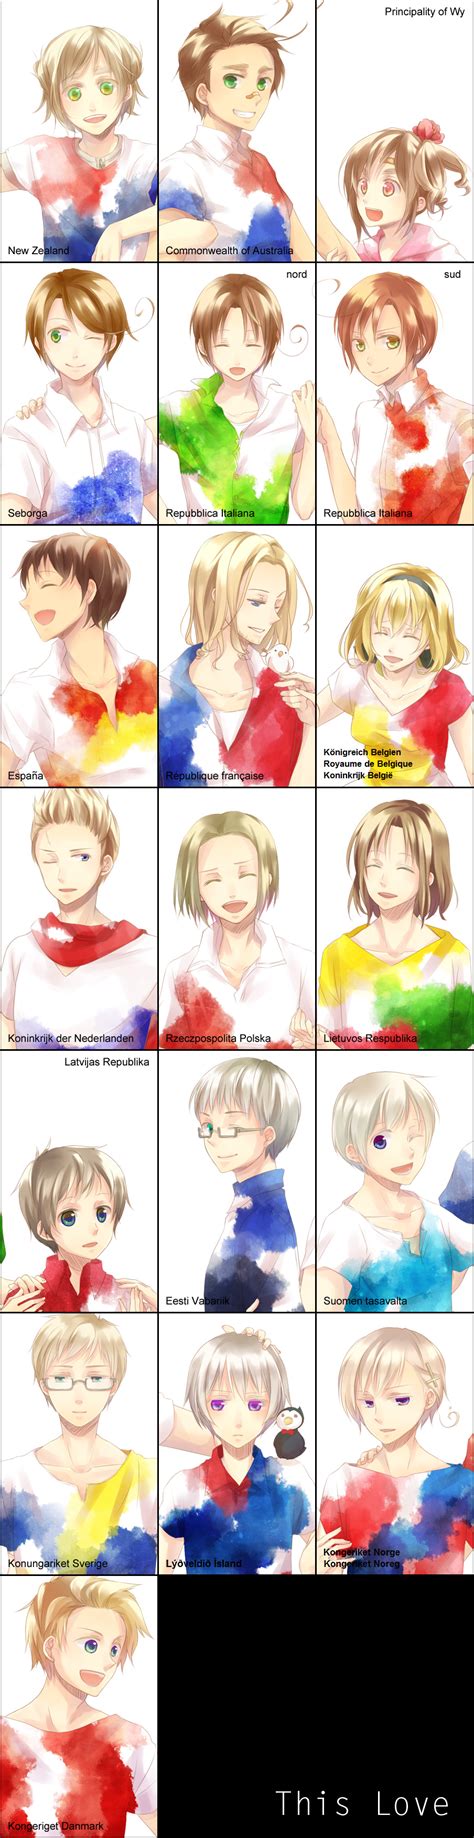 Hetalia Characters With Their Official Names In Their Respective